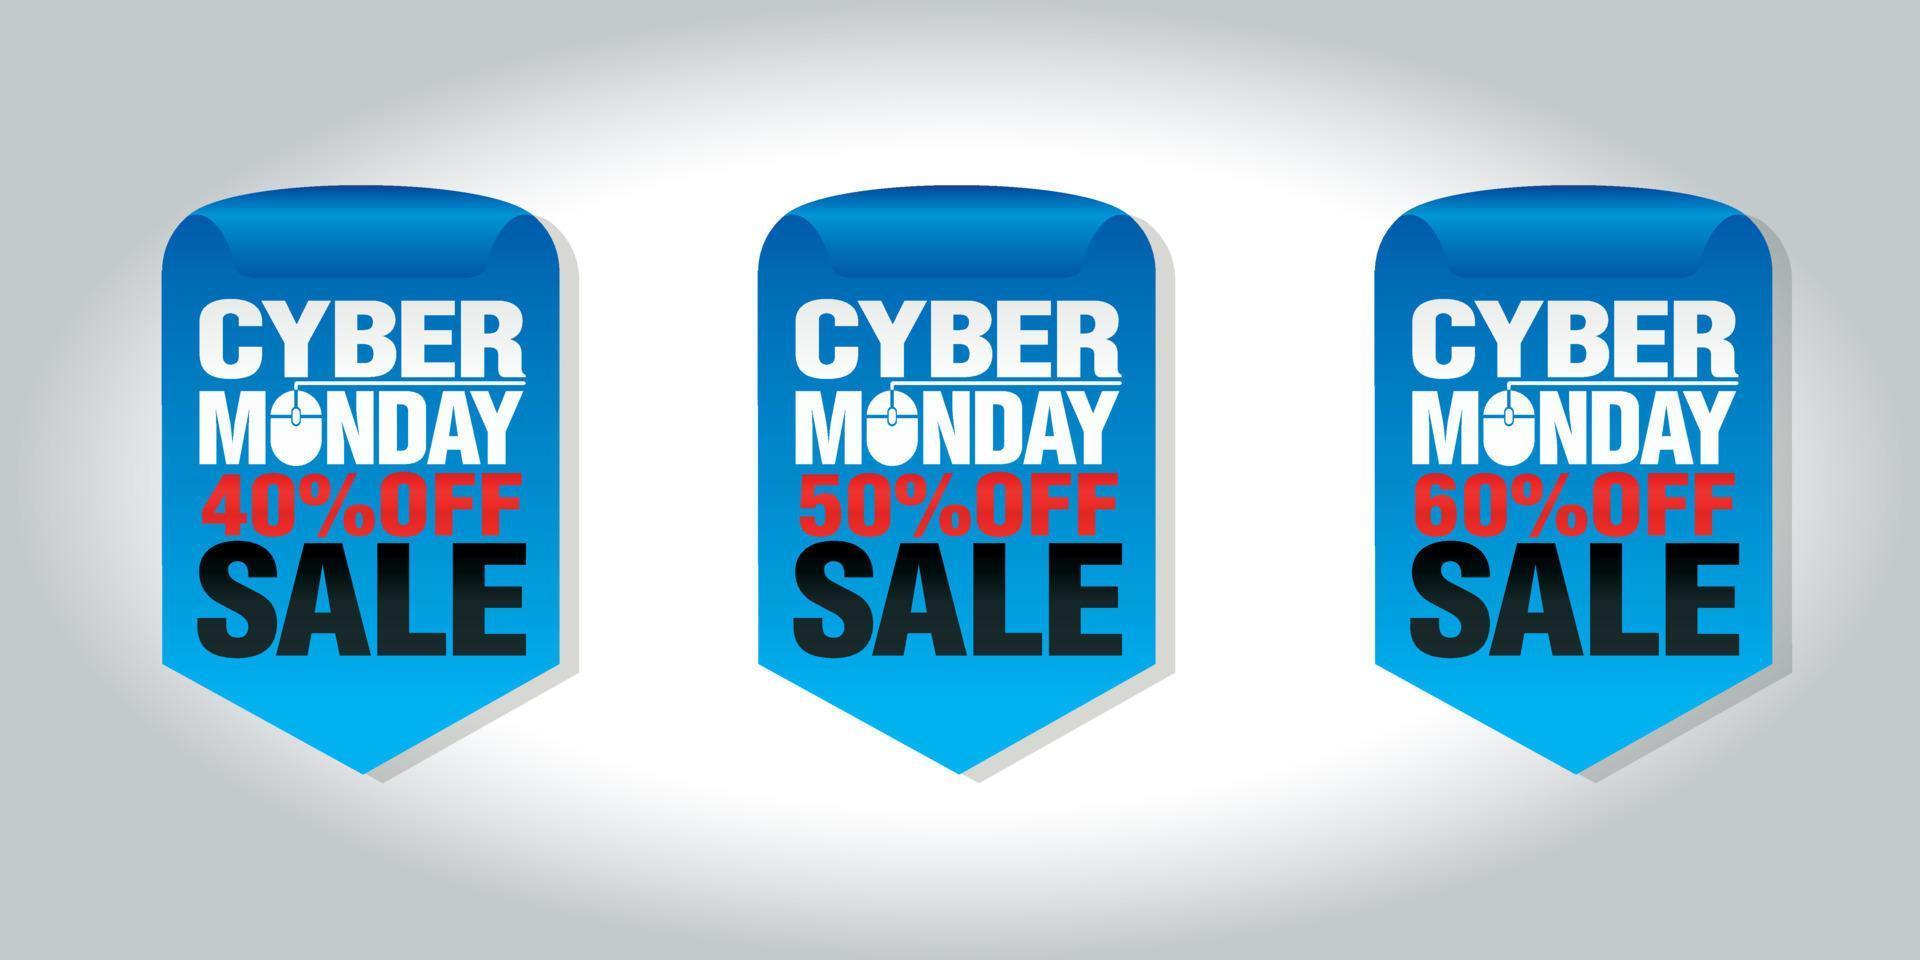 Cyber monday sale set of badges 40, 50, 60 off vector